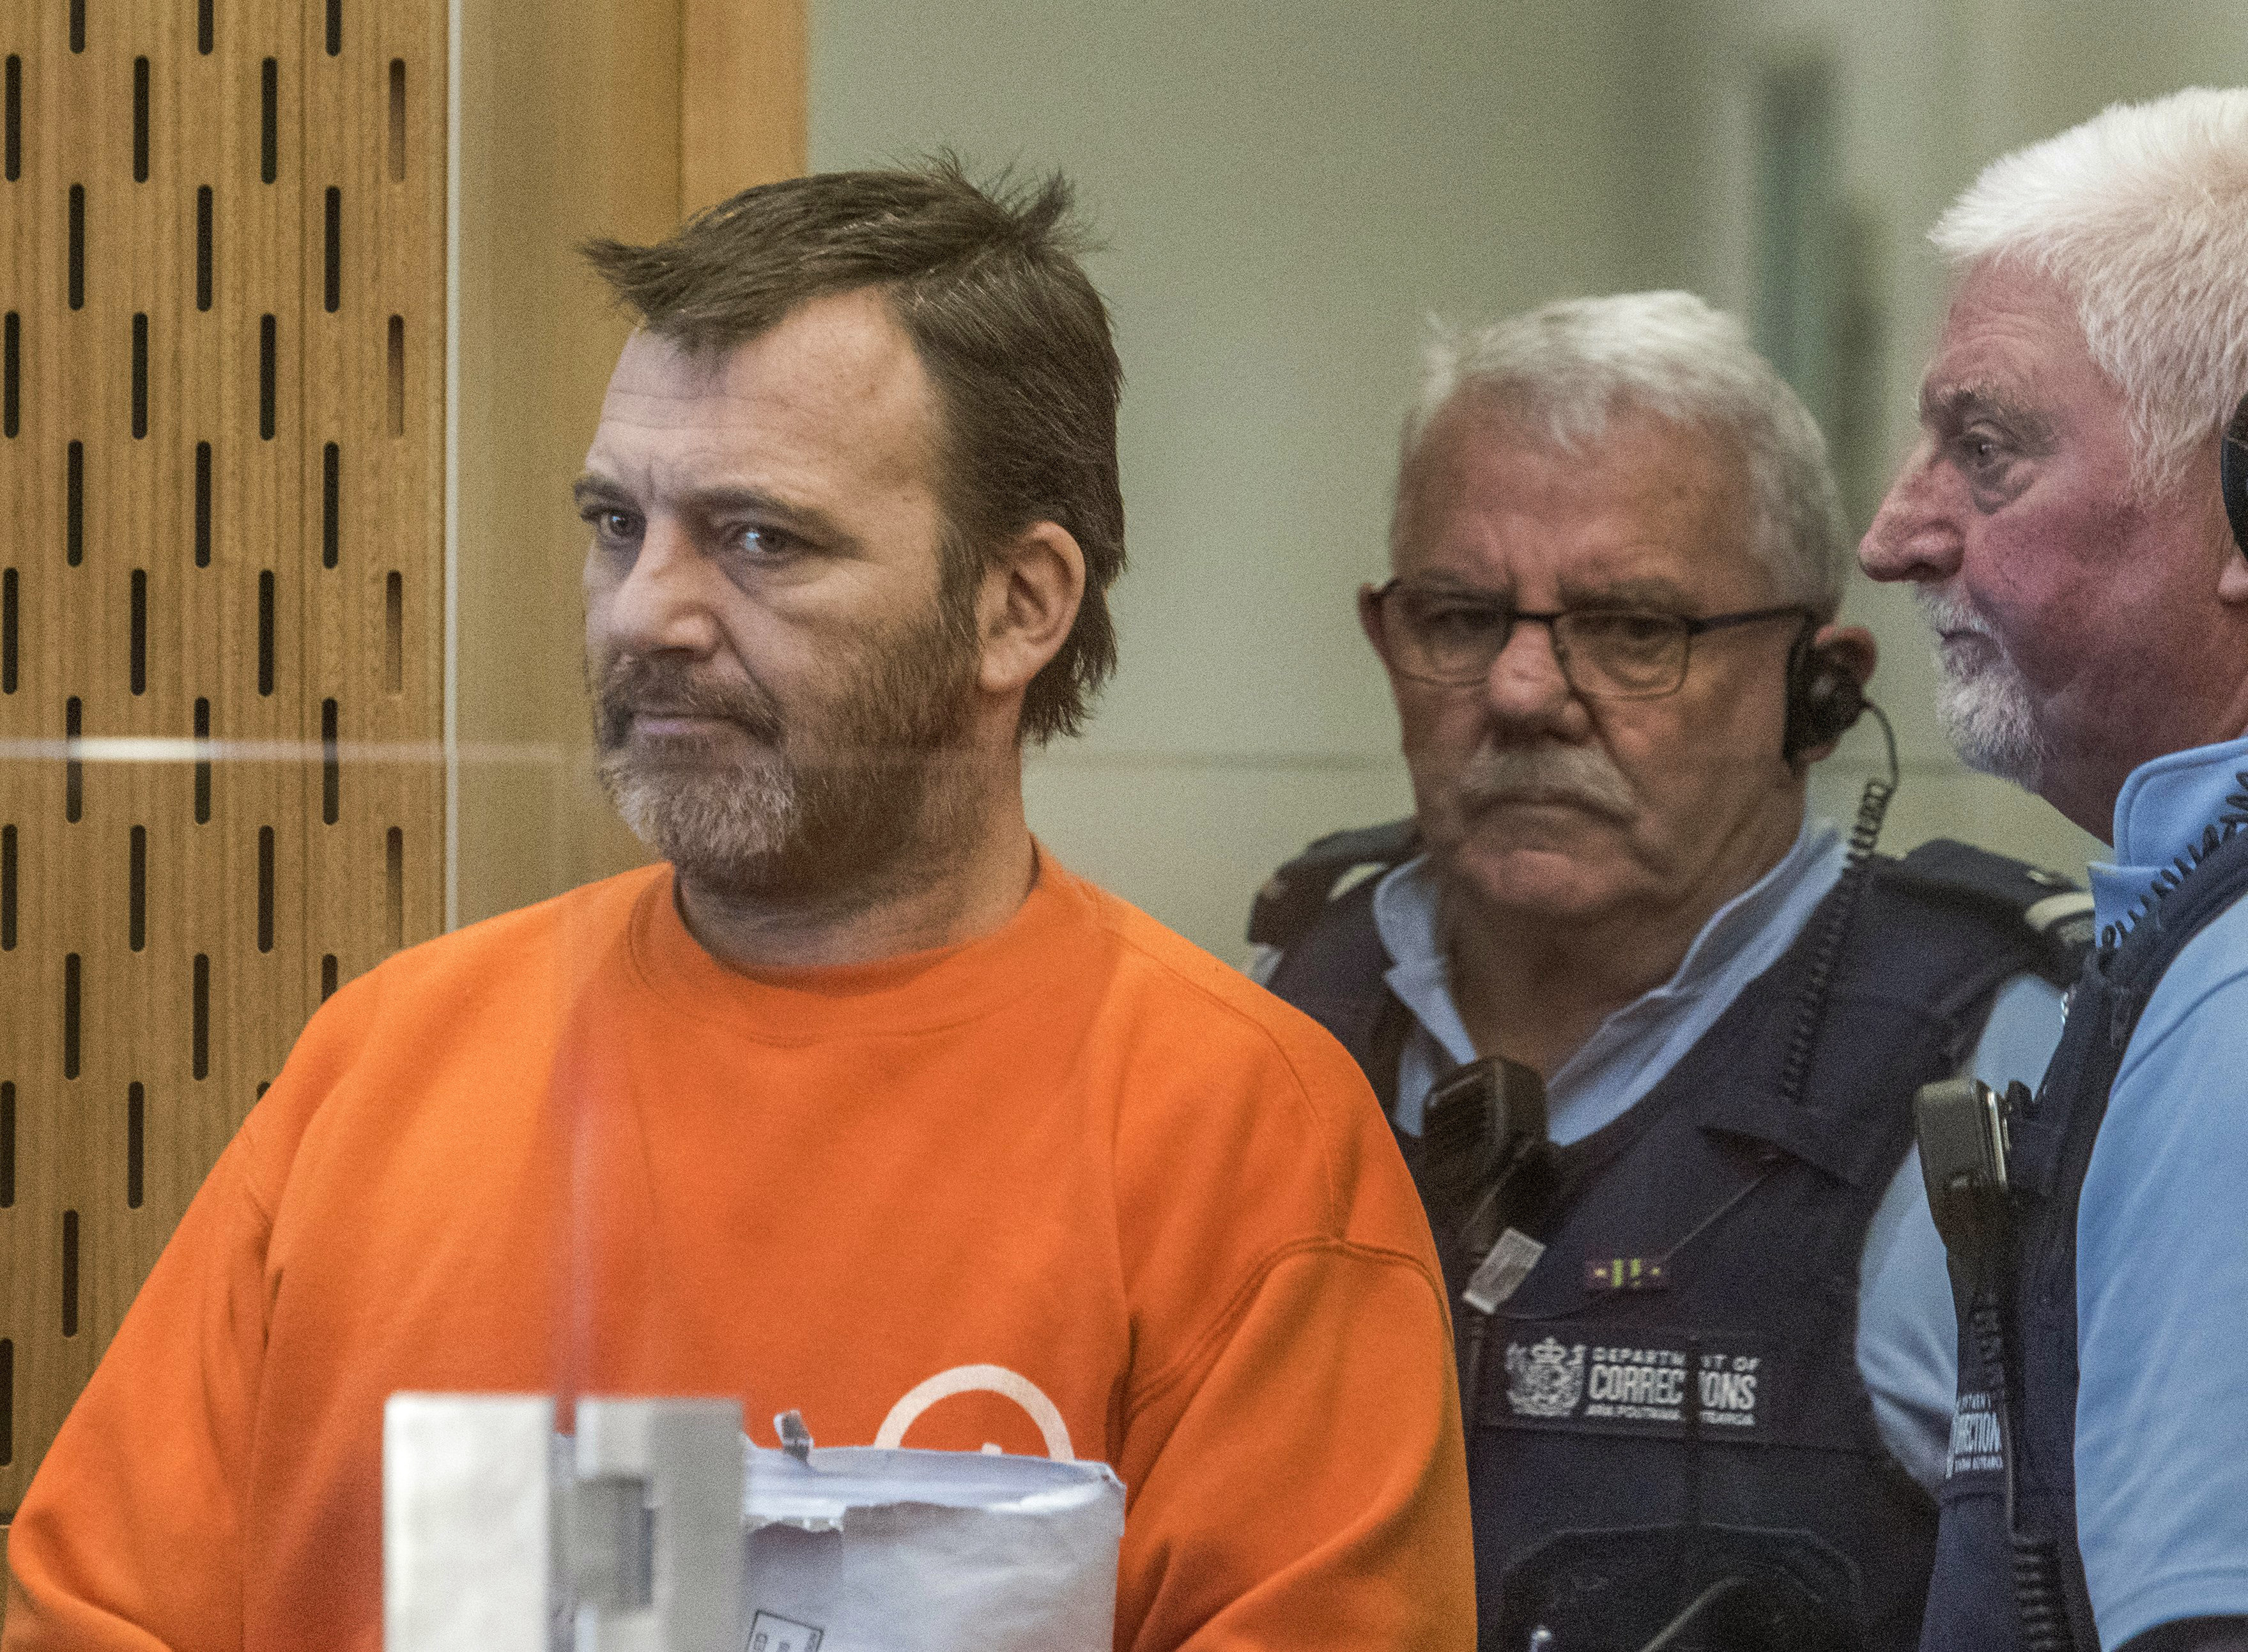 Man Who Shared Christchurch Shooting Video Sentenced To 21 Months In Prison